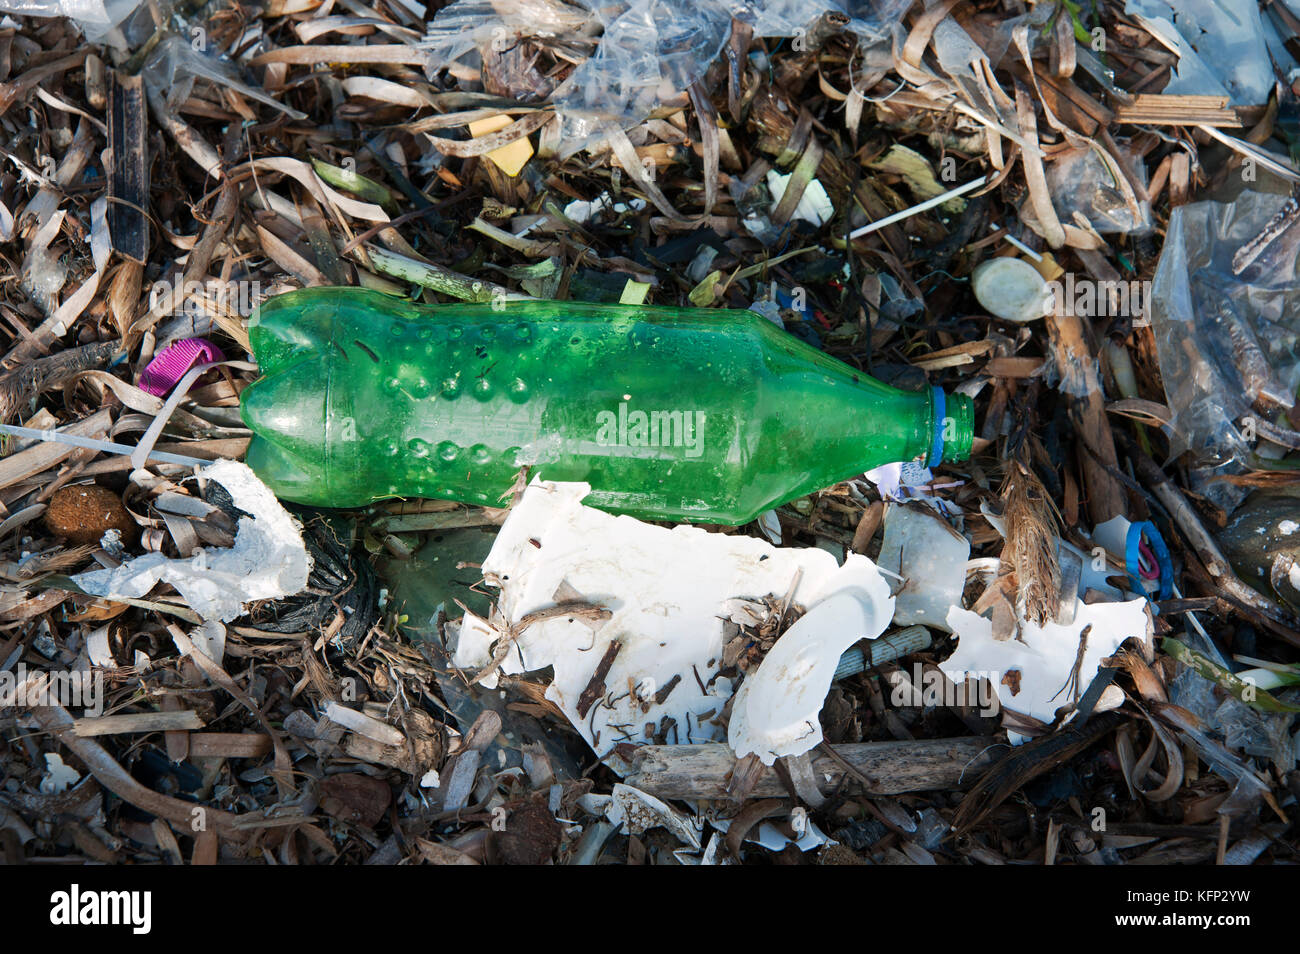 A discarded green plastic fizzy drink bottle amongst multiple bits of plastic washed onto the beach on the Balearic island of Menorca Stock Photo